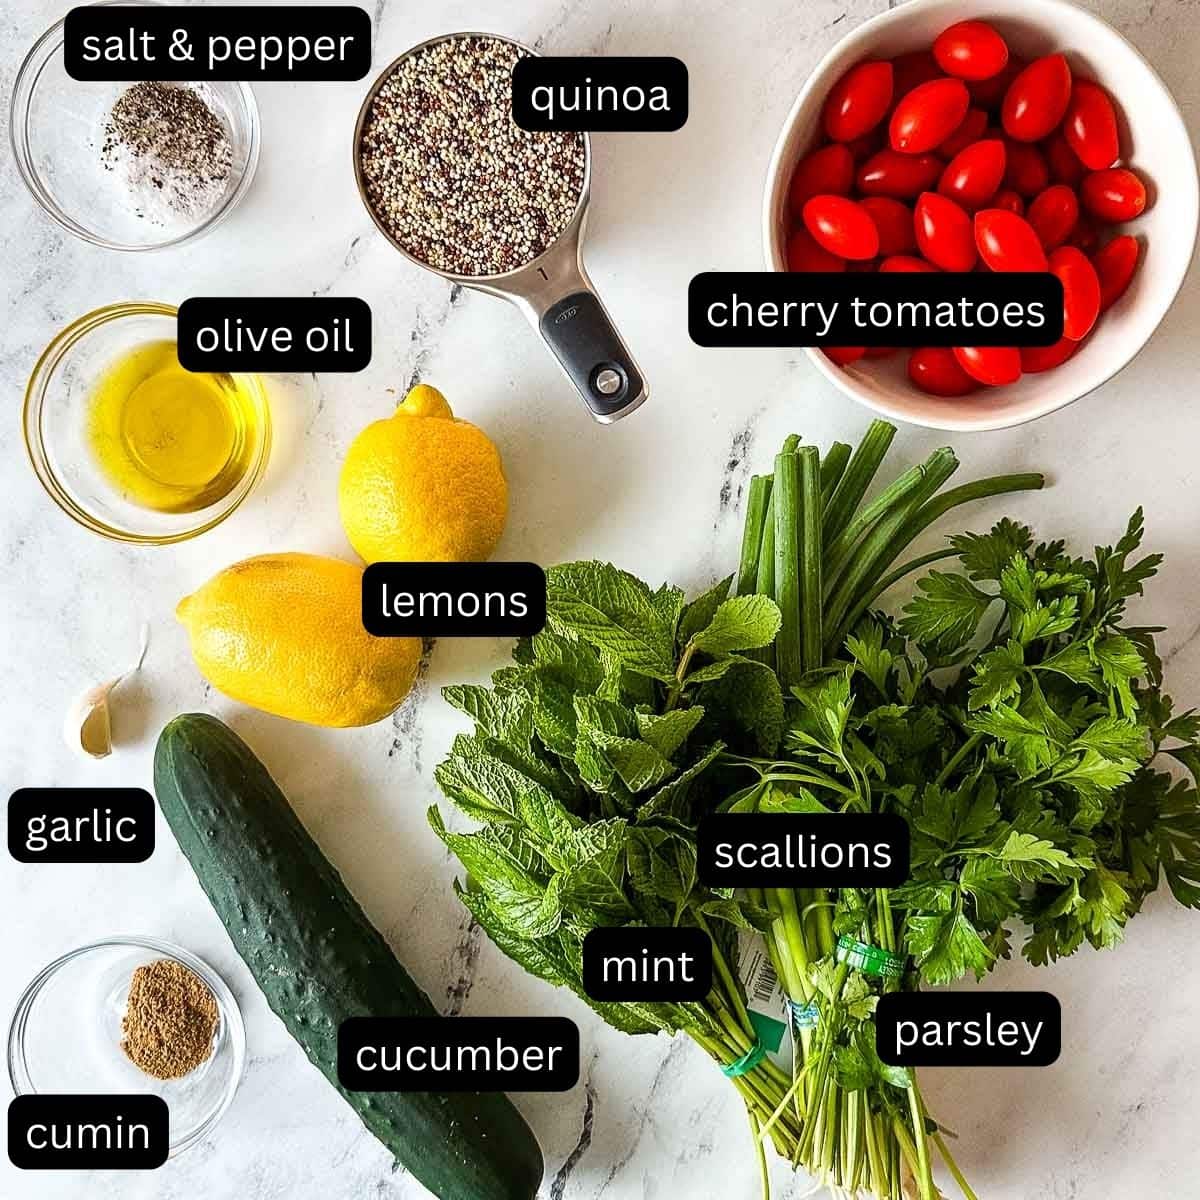 Labeled ingredients for quinoa salad on a white marble counter.